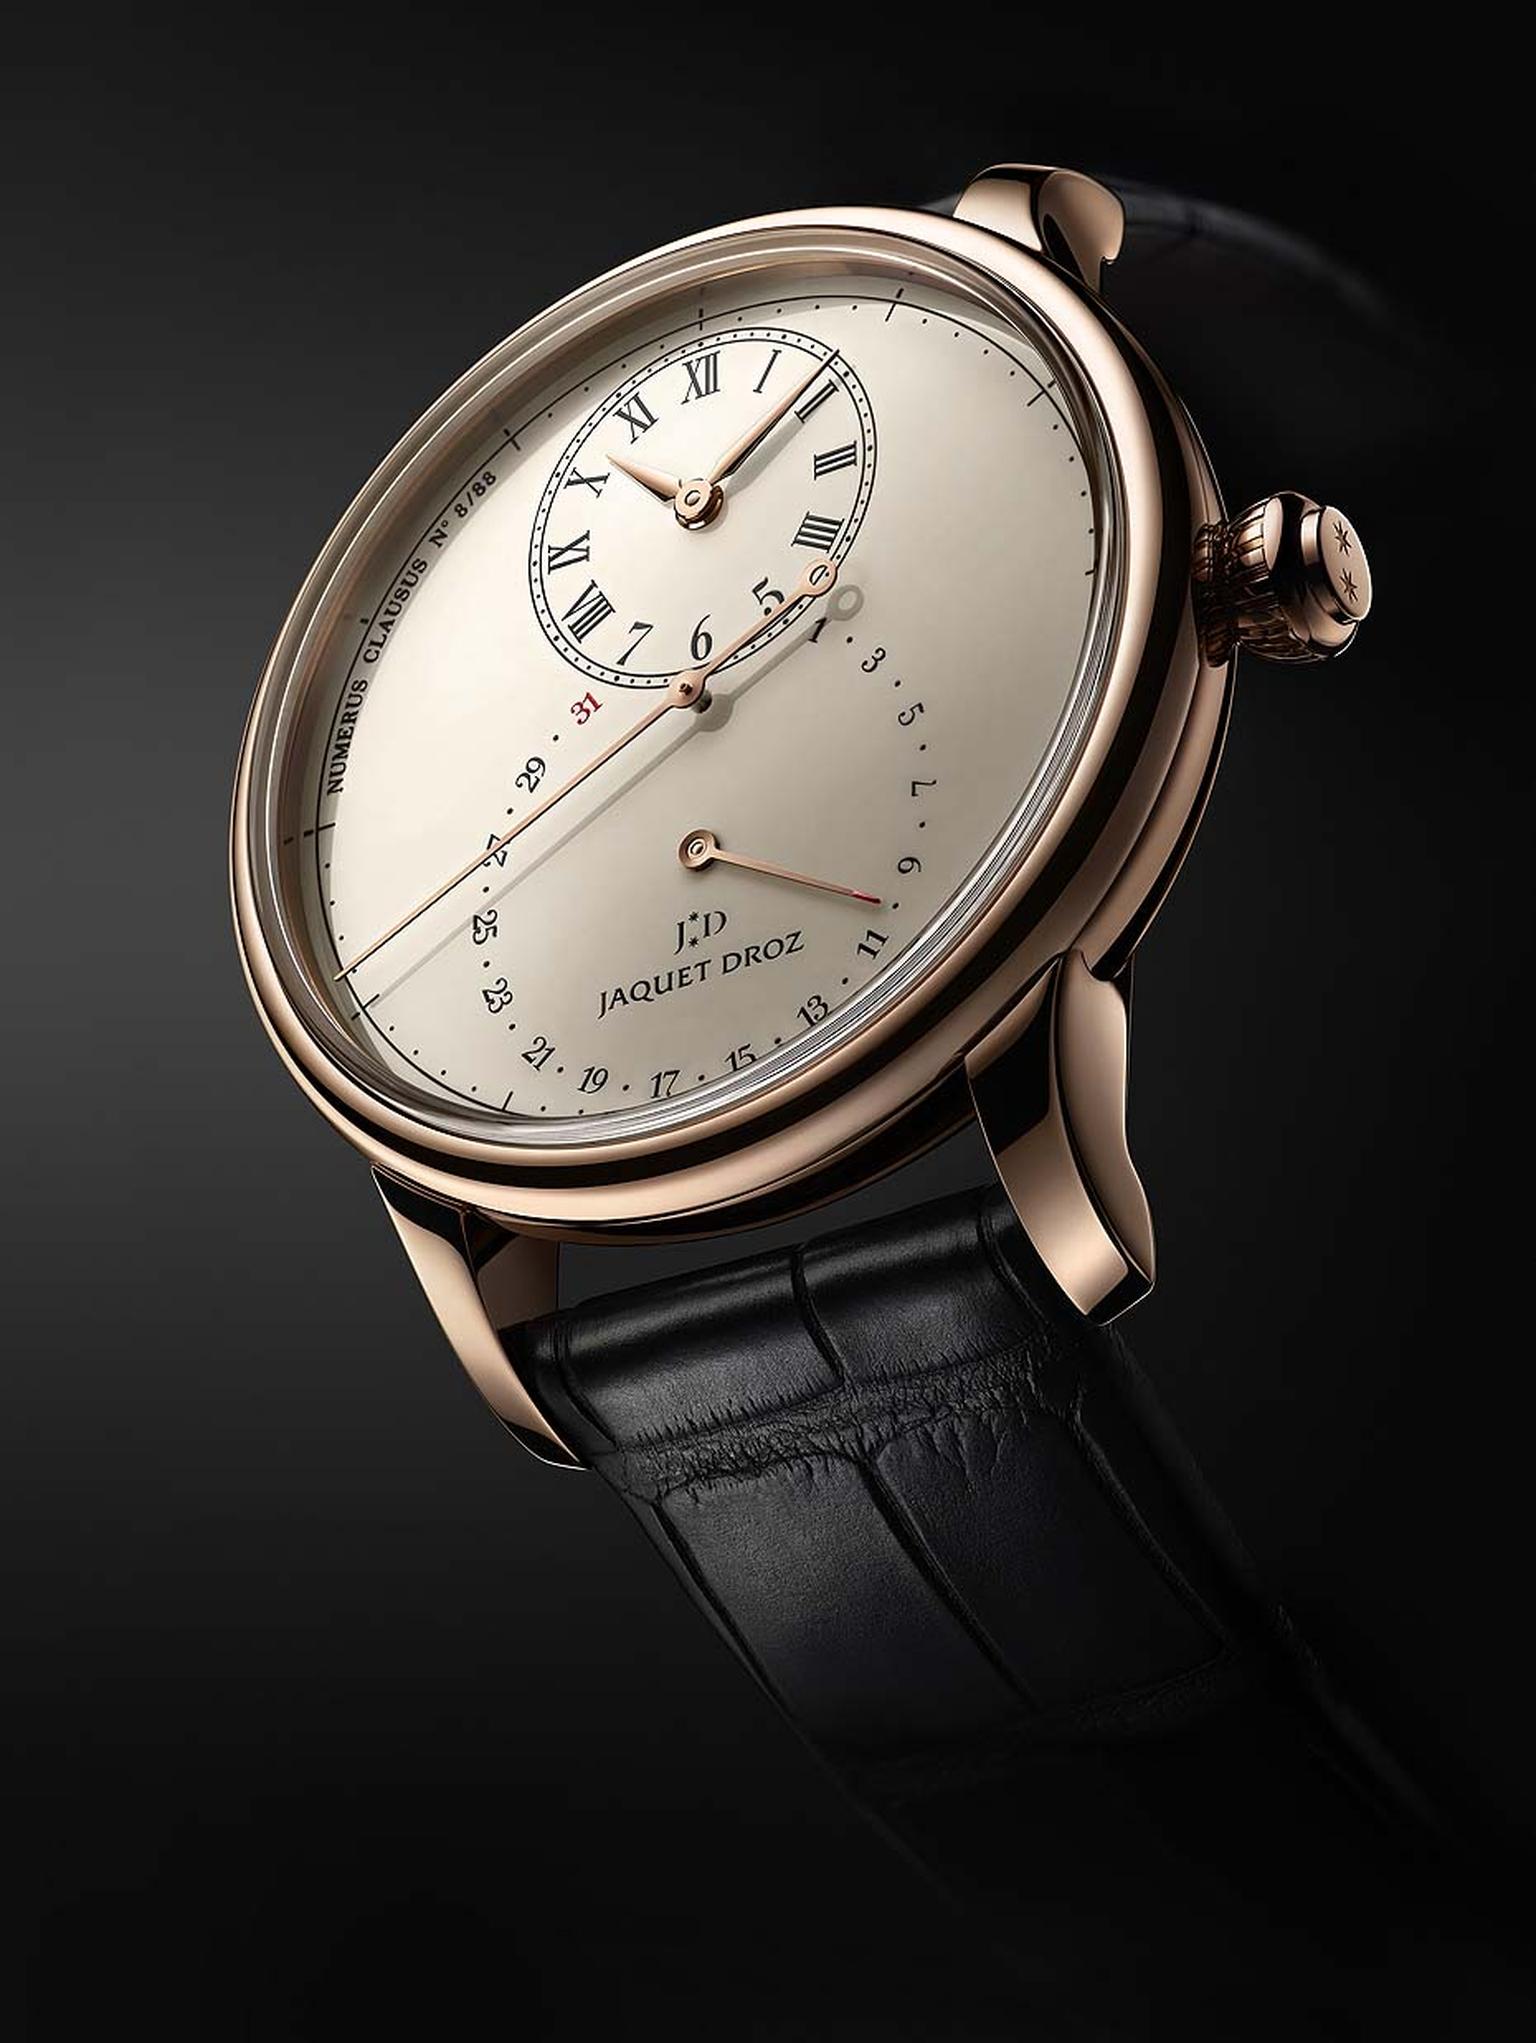 Jaquet Droz Grande Seconde Deadbeat watch features a deadbeat seconds complication making the large seconds hand jump as it passes each second on the 43mm dial. The hour disc and larger retrograde date display disc on the central dial overlap to create th